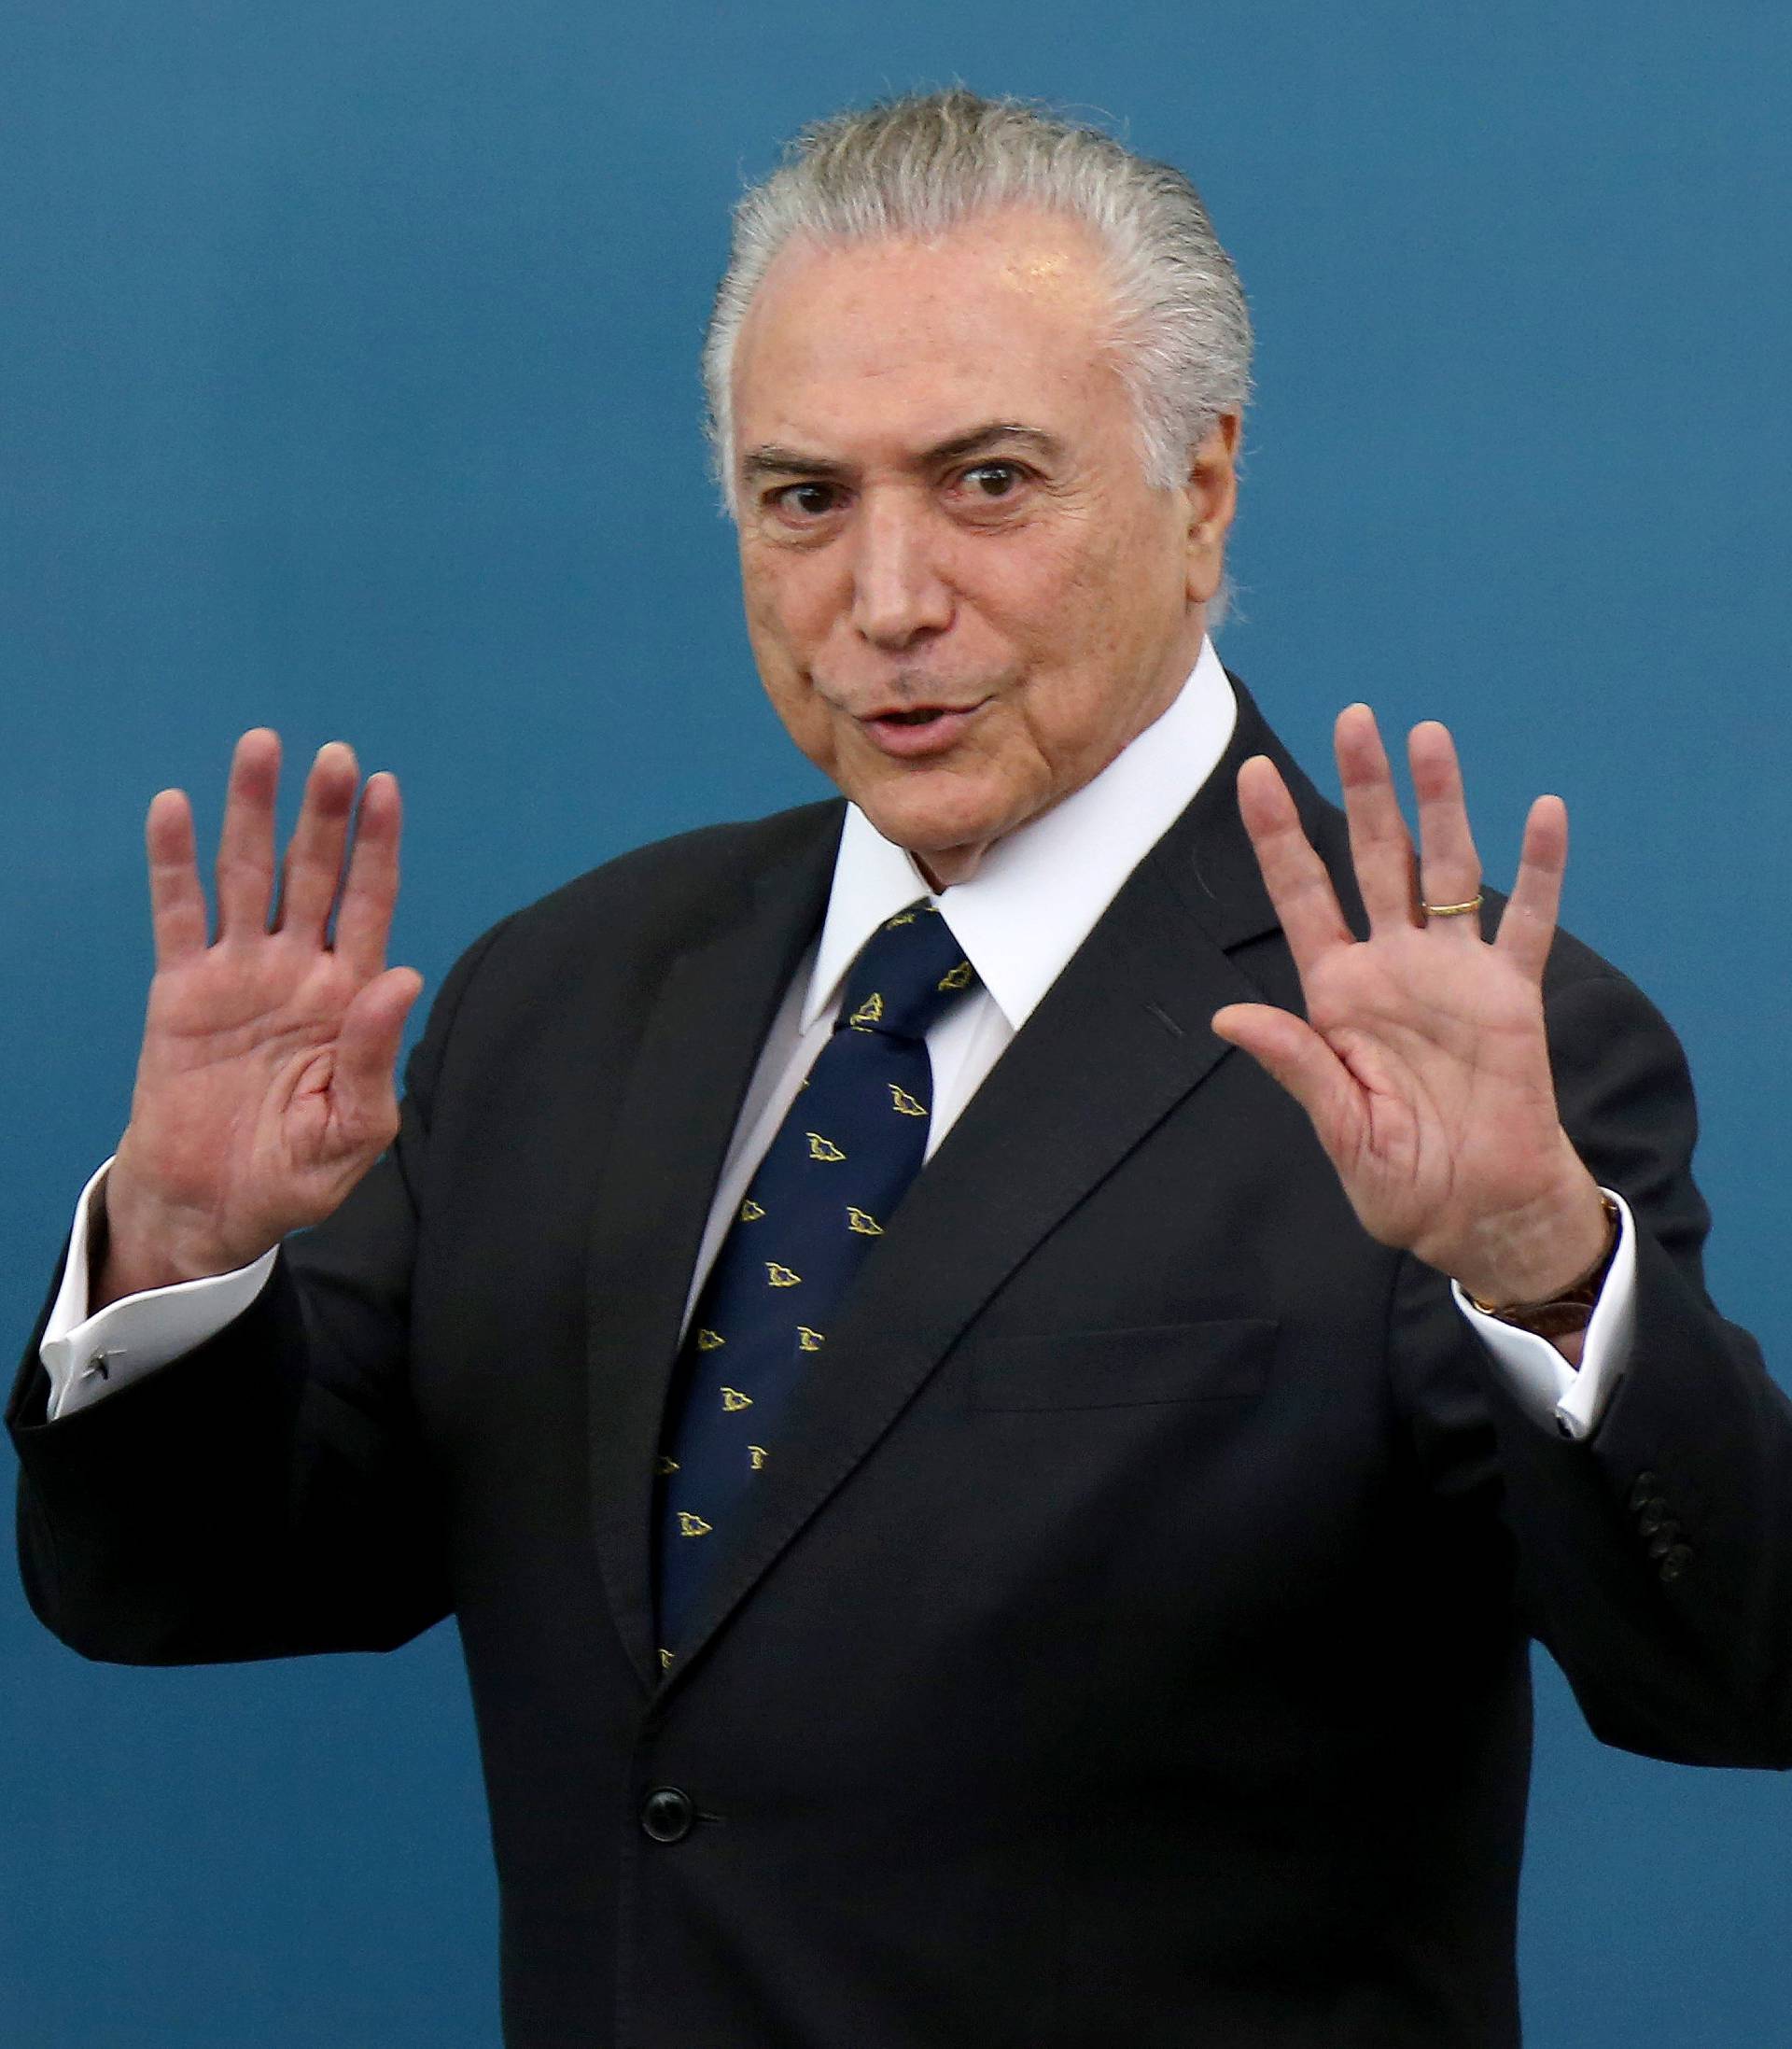 Brazil's President Michel Temer gestures during a ceremony at the Planalto Palace in Brasilia